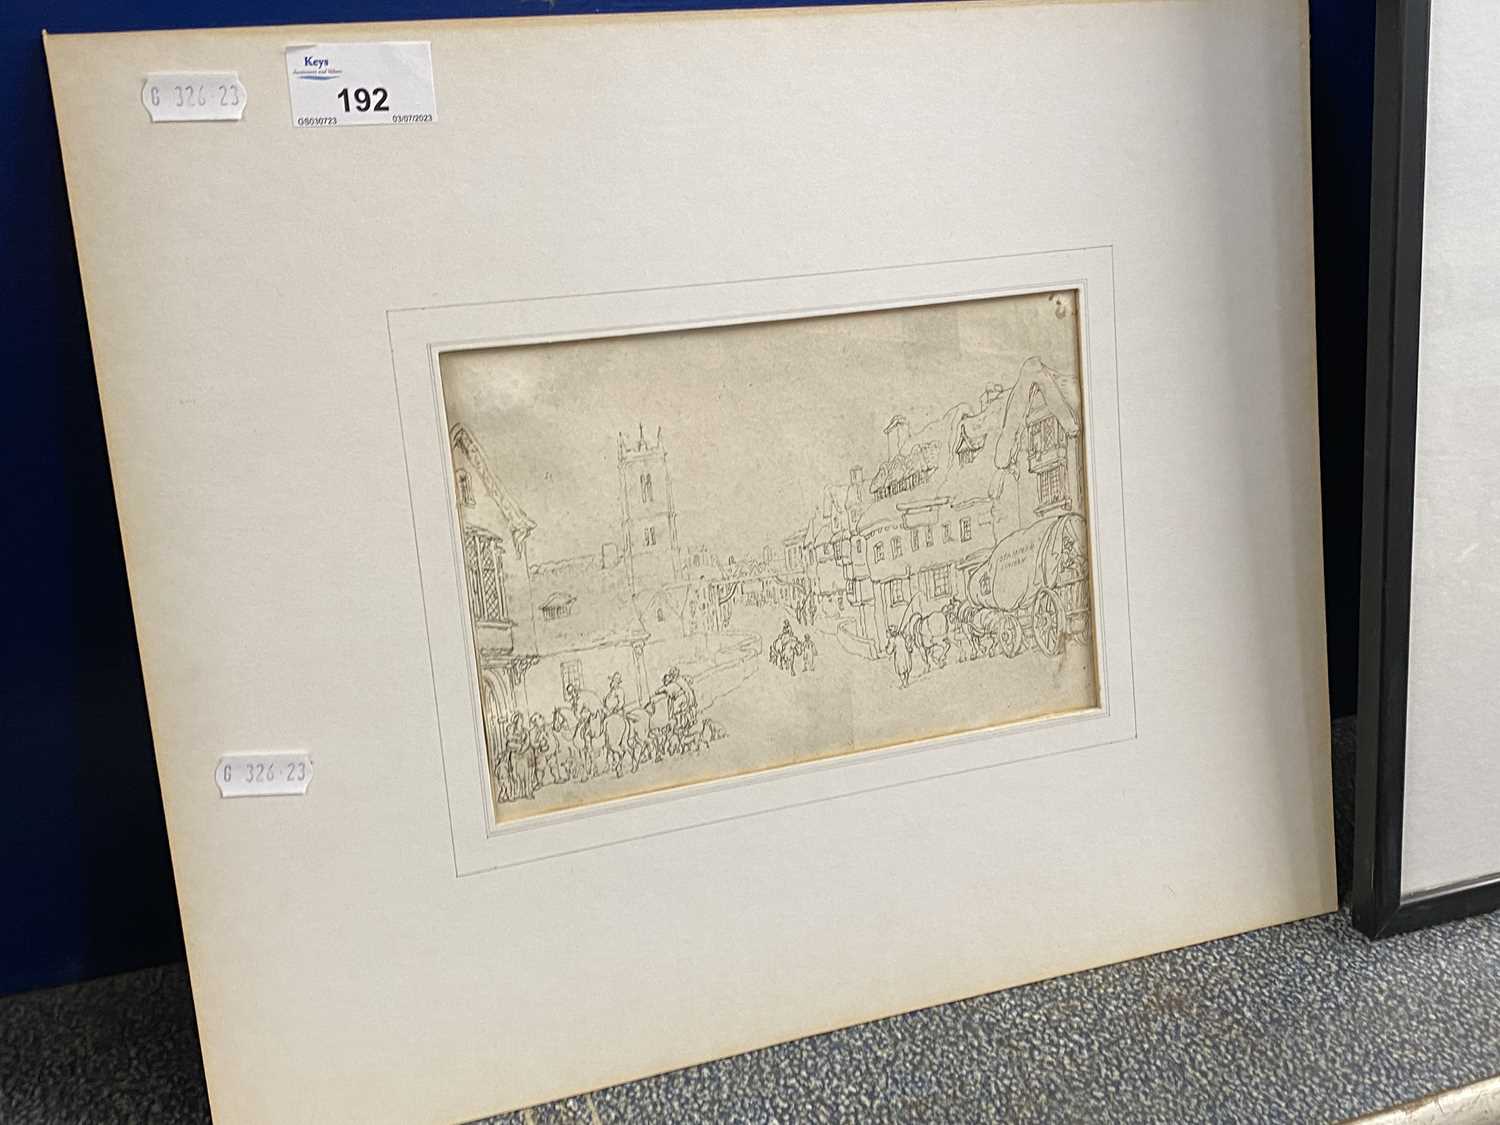 Thomas Rowlandson, etching The George at Stamford, Lincolnshire, mounted but unframed